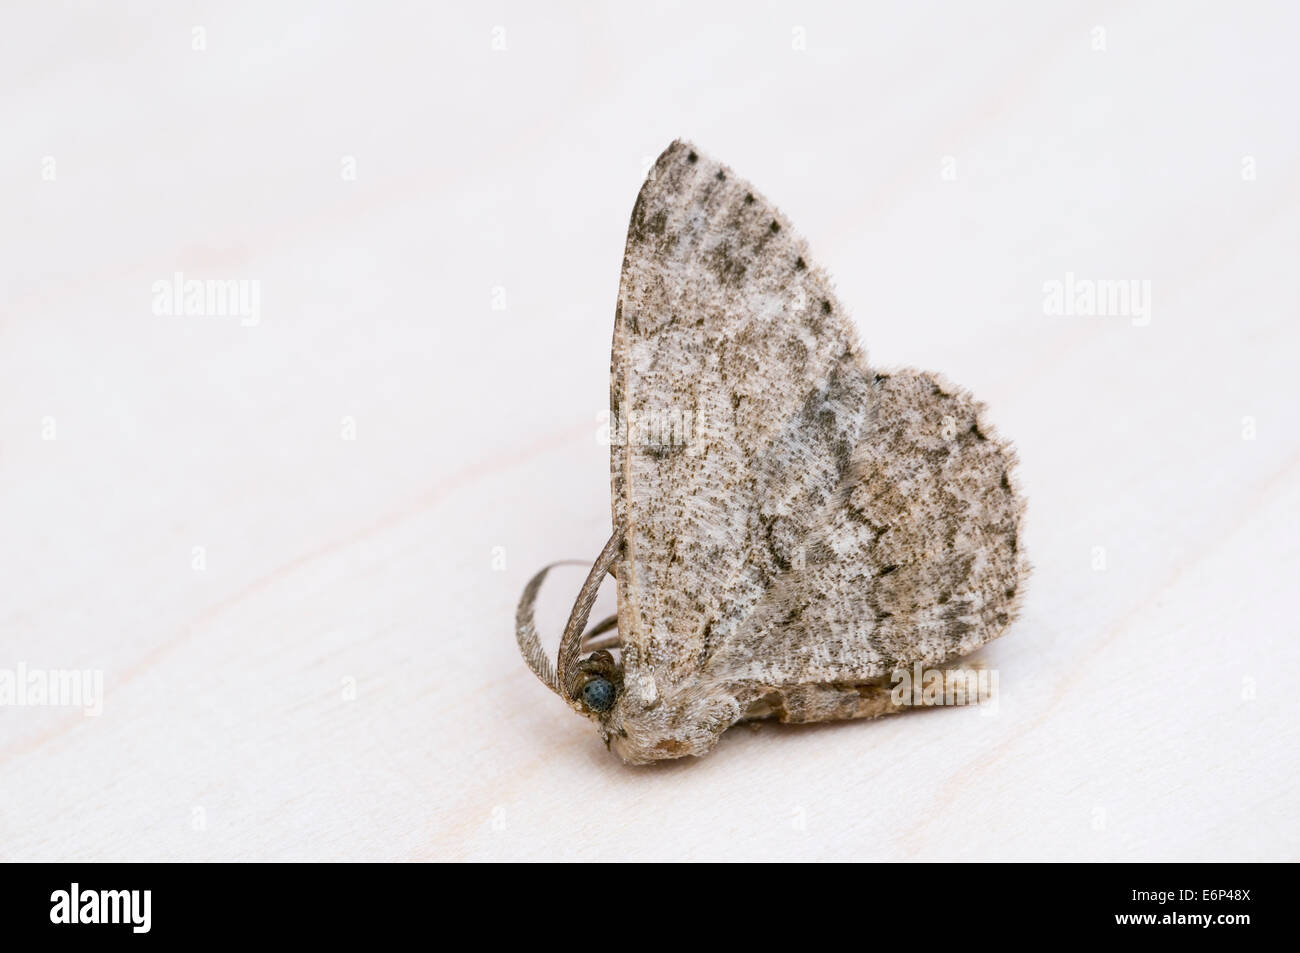 Nocturnal butterfly / Moth Stock Photo